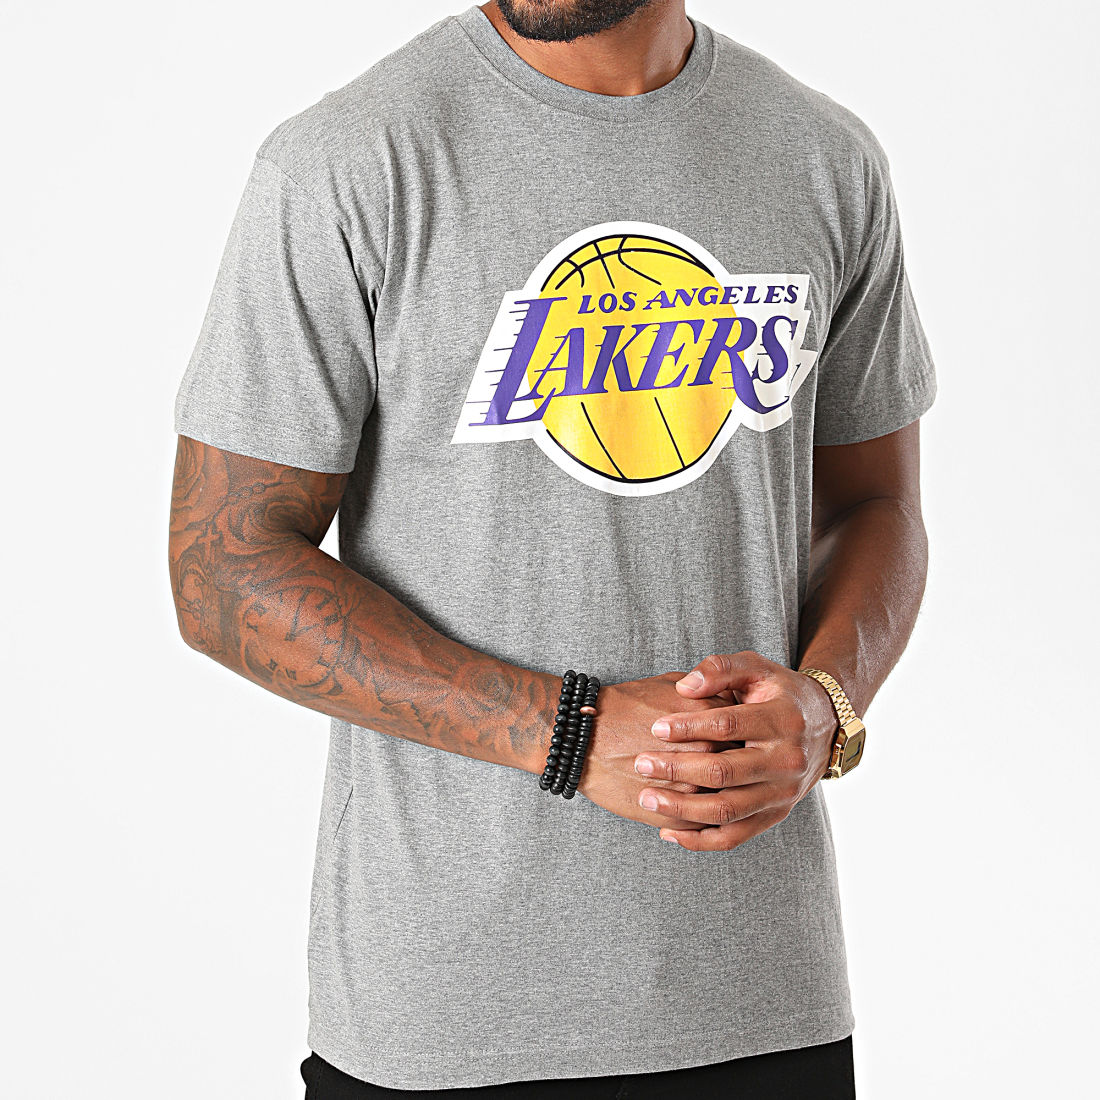 Mitchell and Ness - Tee Shirt Team Logo Table Los Angeles Lakers